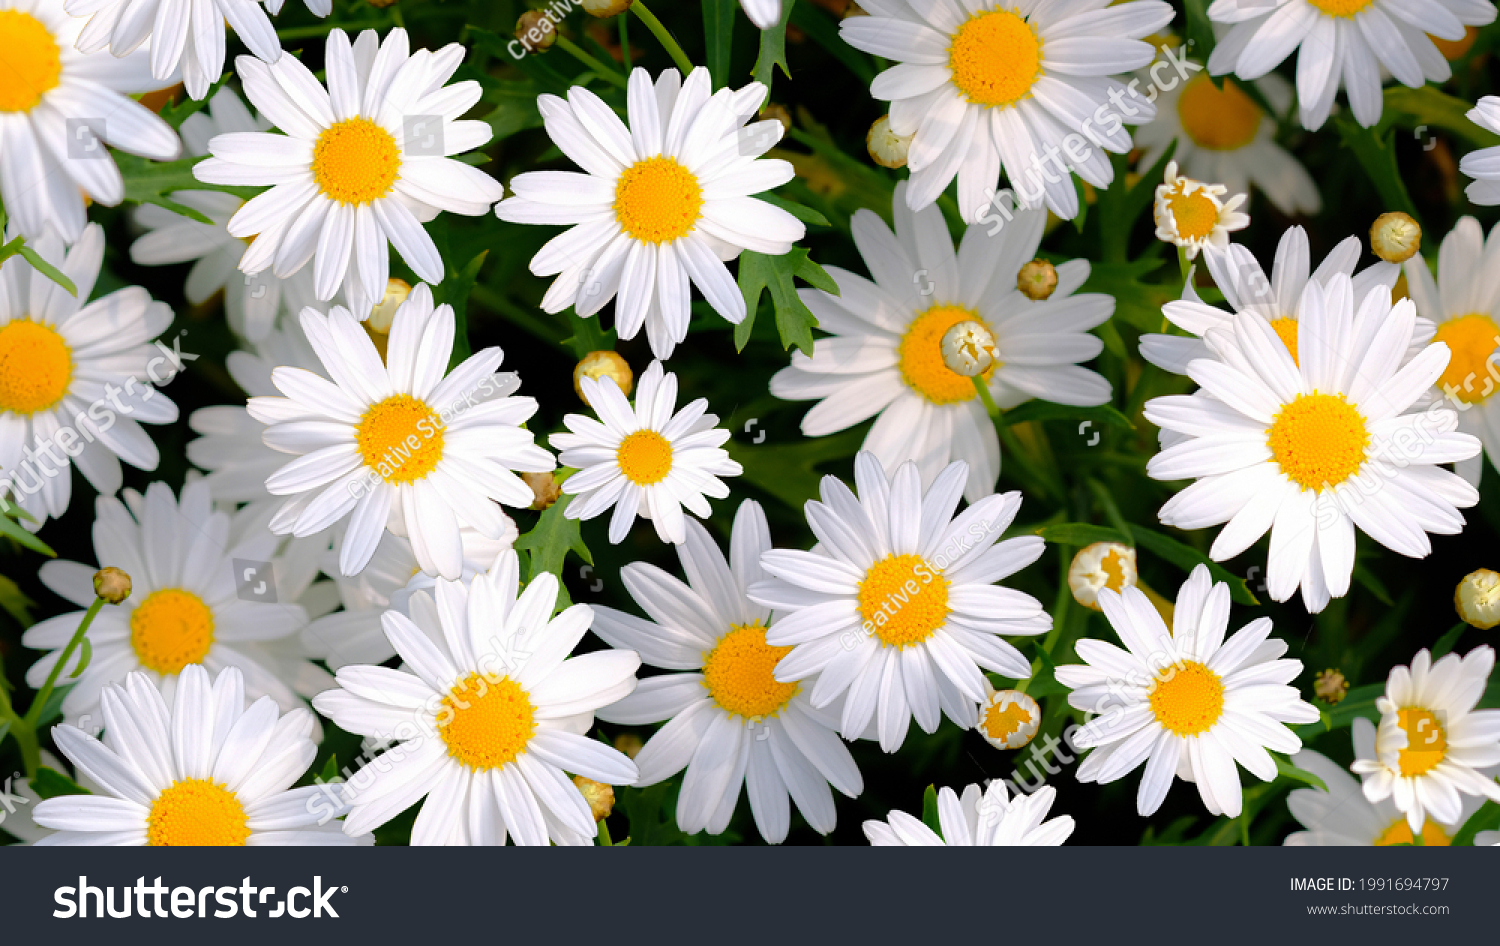 Wild daisy flowers growing on meadow, white chamomiles on green grass background. Oxeye daisy, Leucanthemum vulgare, Daisies, Dox-eye, Common daisy, Dog daisy, Gardening concept. #1991694797